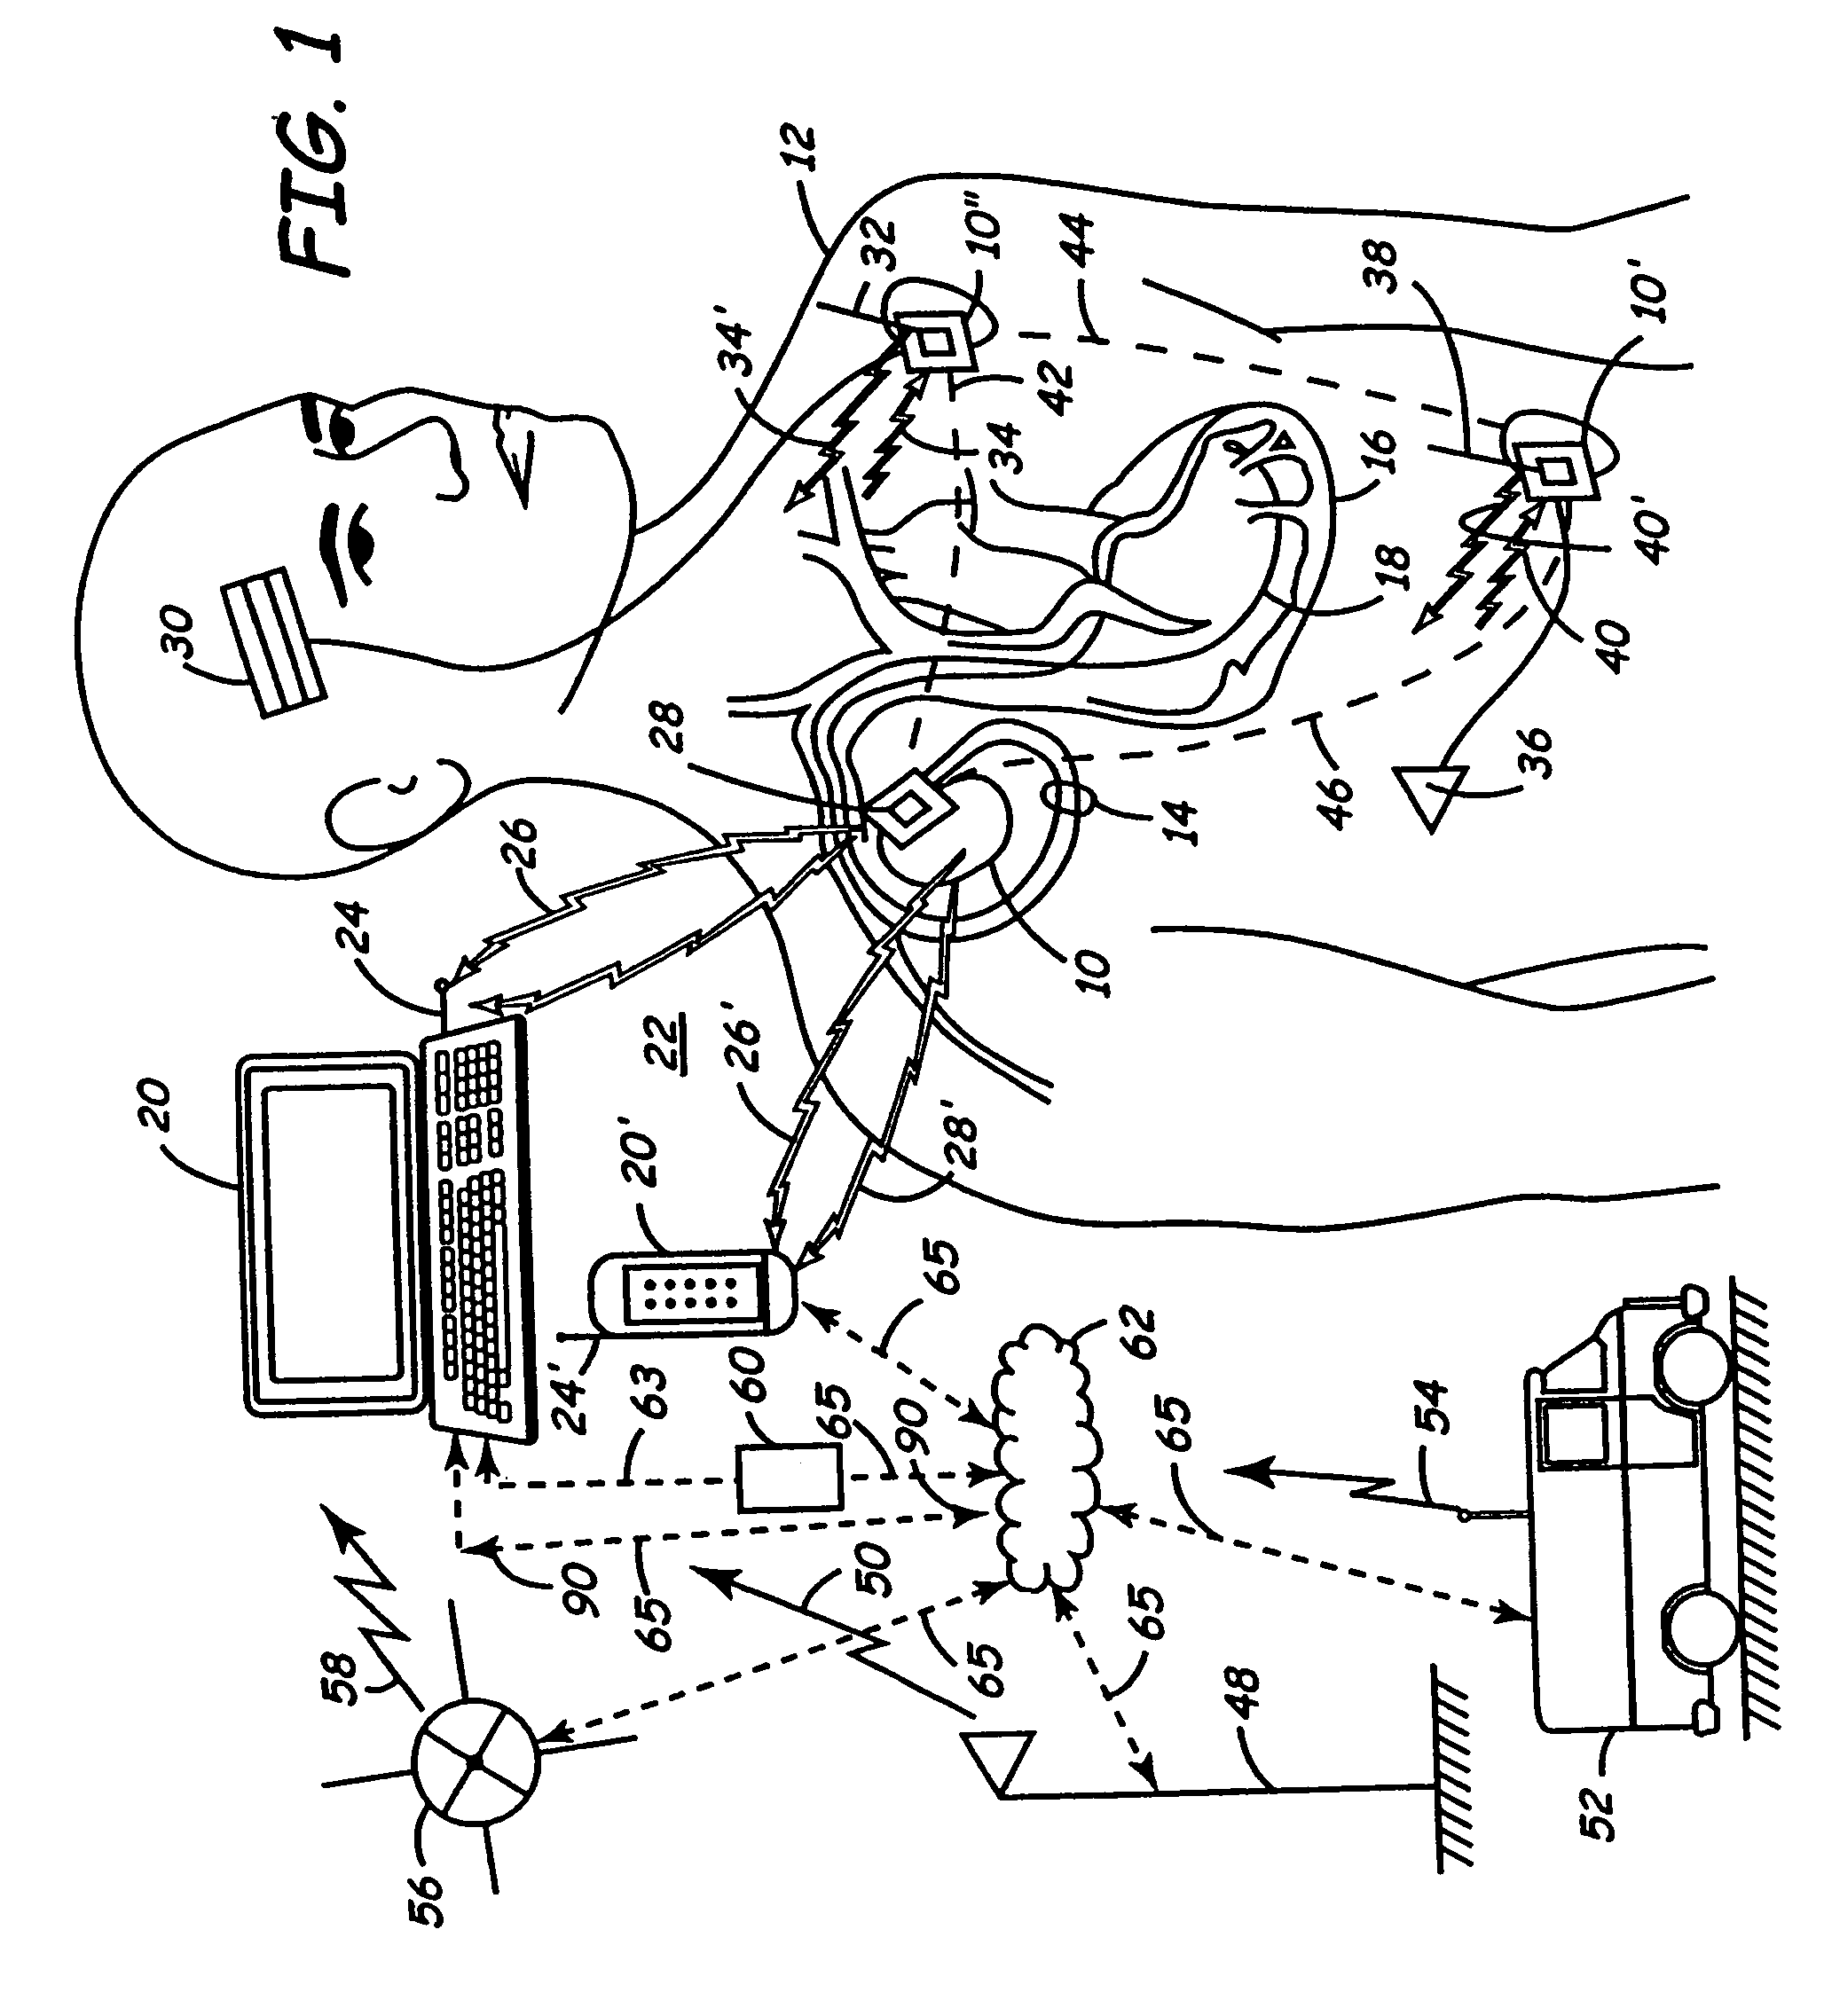 Communications system for an implantable medical device and a delivery device